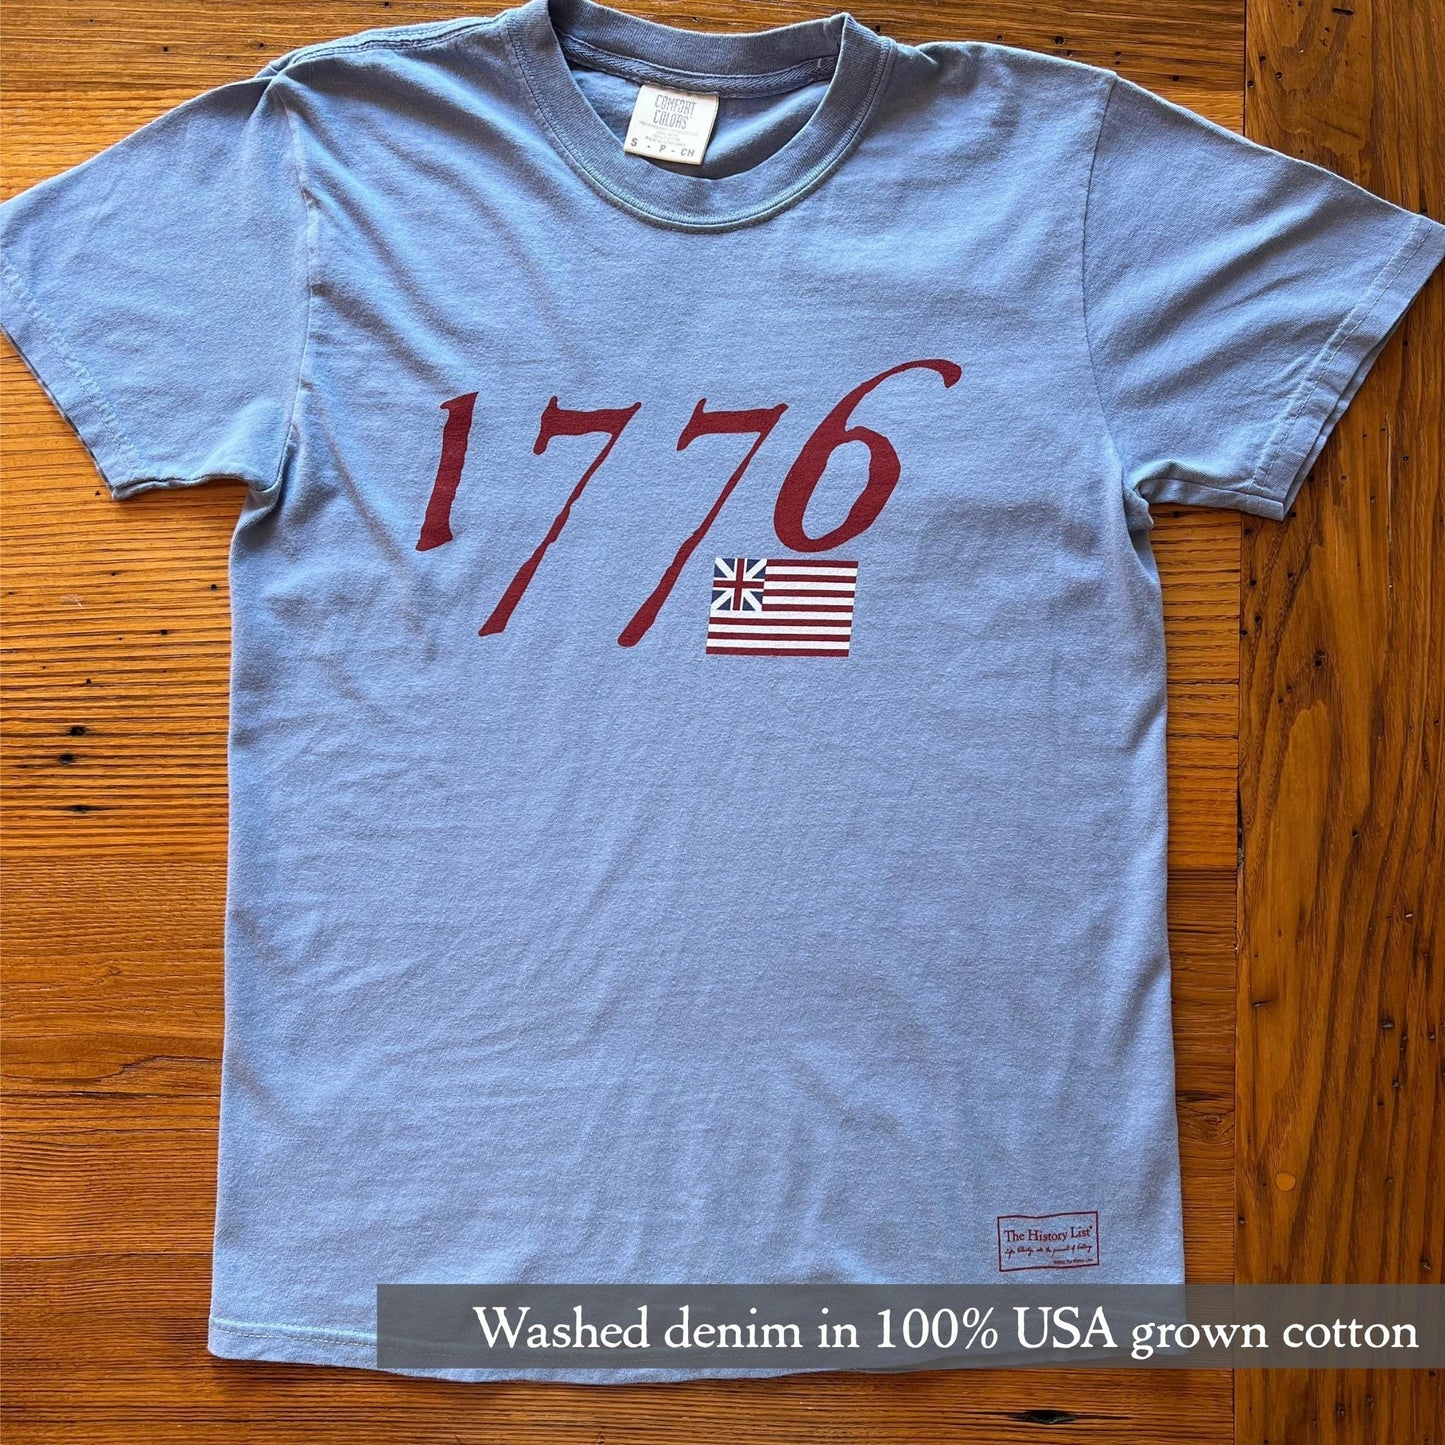 "We hold these truths - July 4, 1776” T-shirt in Washed denim from The History List